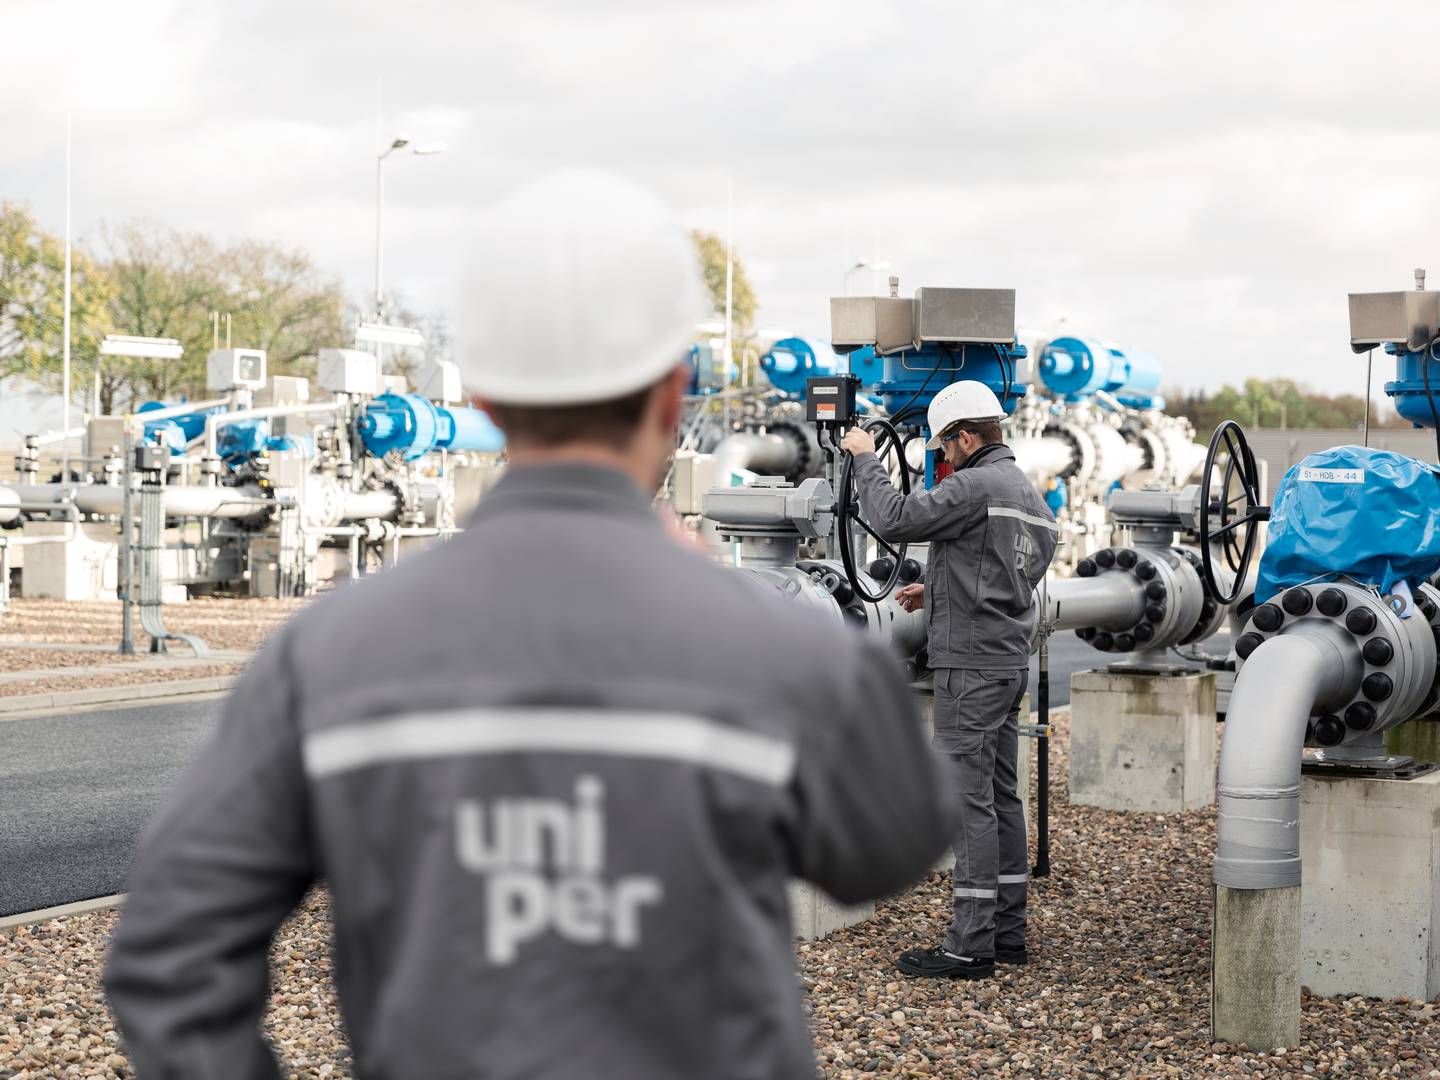 Uniper has been propelled by low gas prices in Q1, as the company has been forced to buy electricity on the wholesale market. | Photo: Uniper